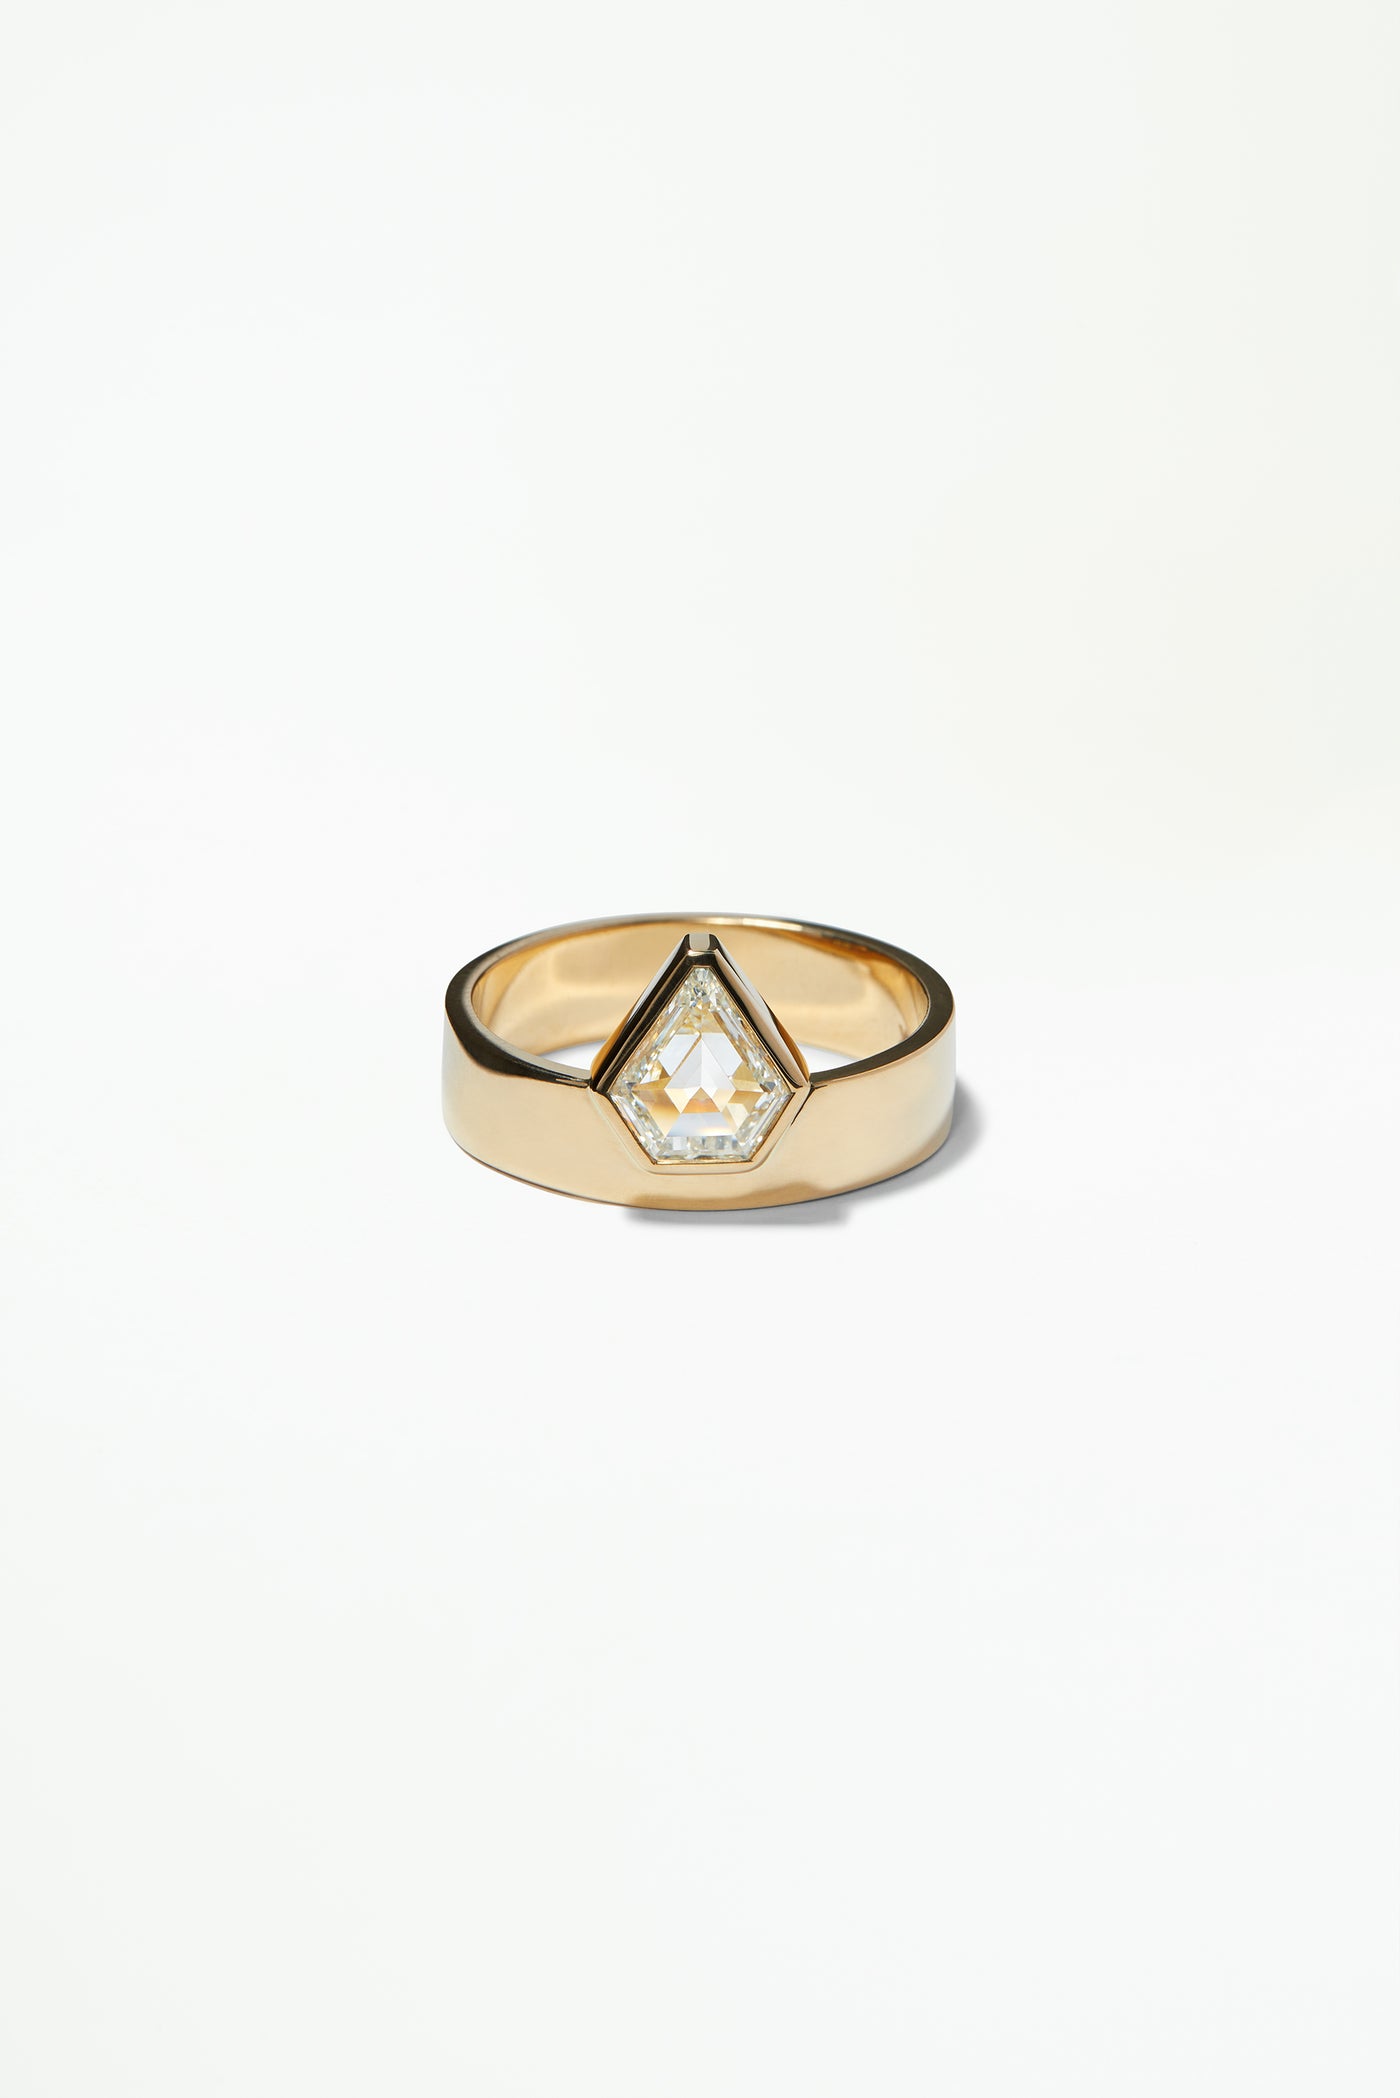 One of a Kind Shield Diamond Monolith Ring